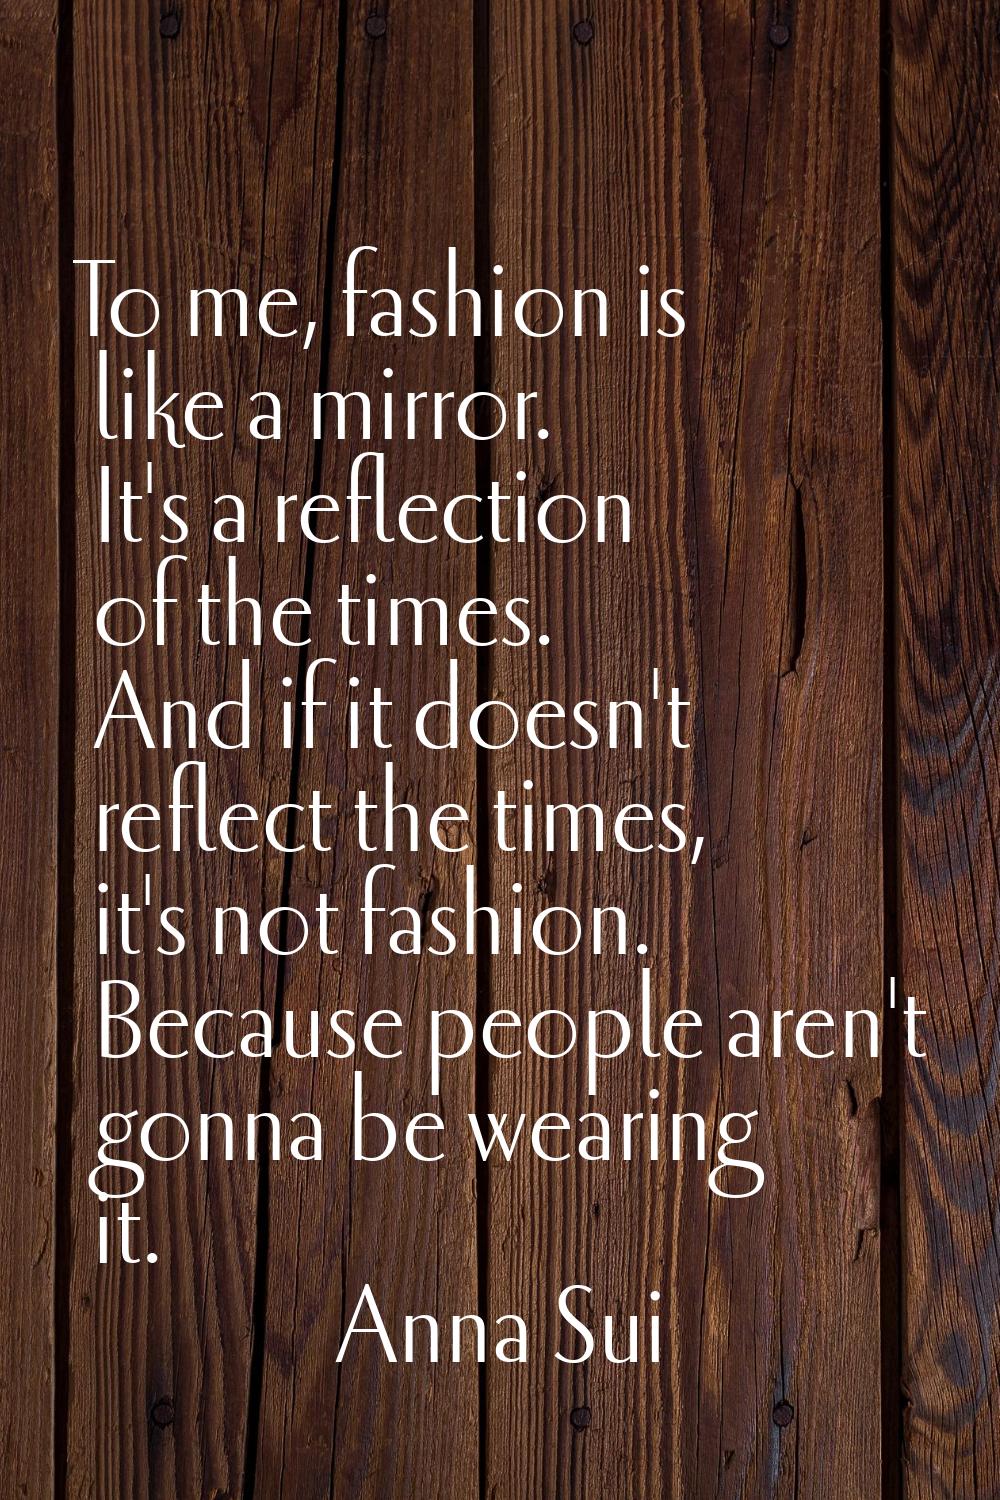 To me, fashion is like a mirror. It's a reflection of the times. And if it doesn't reflect the time